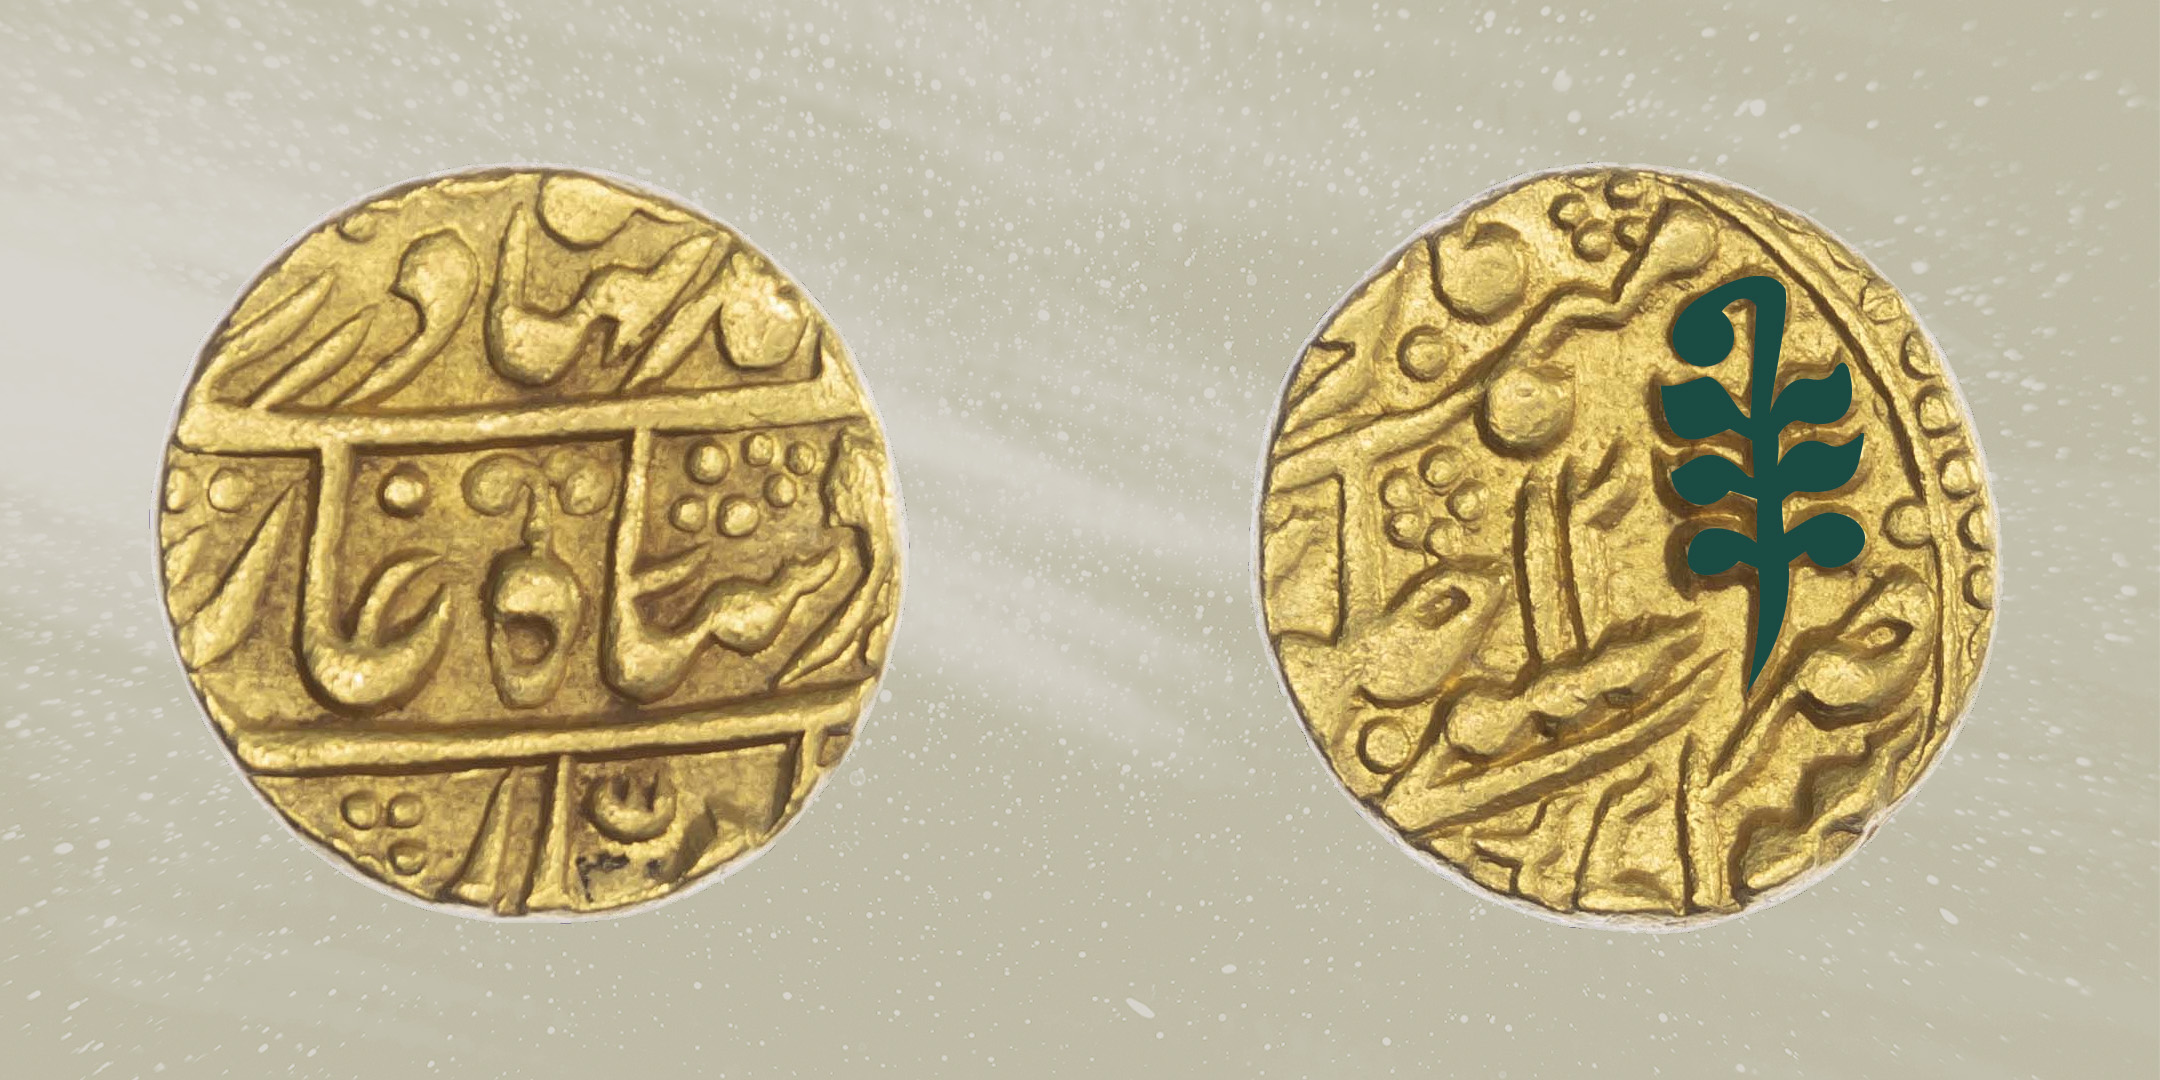 A gold mohur coin fromIndia, Princely States, Jaipur. A green icnon illustrated the plant on the coin.